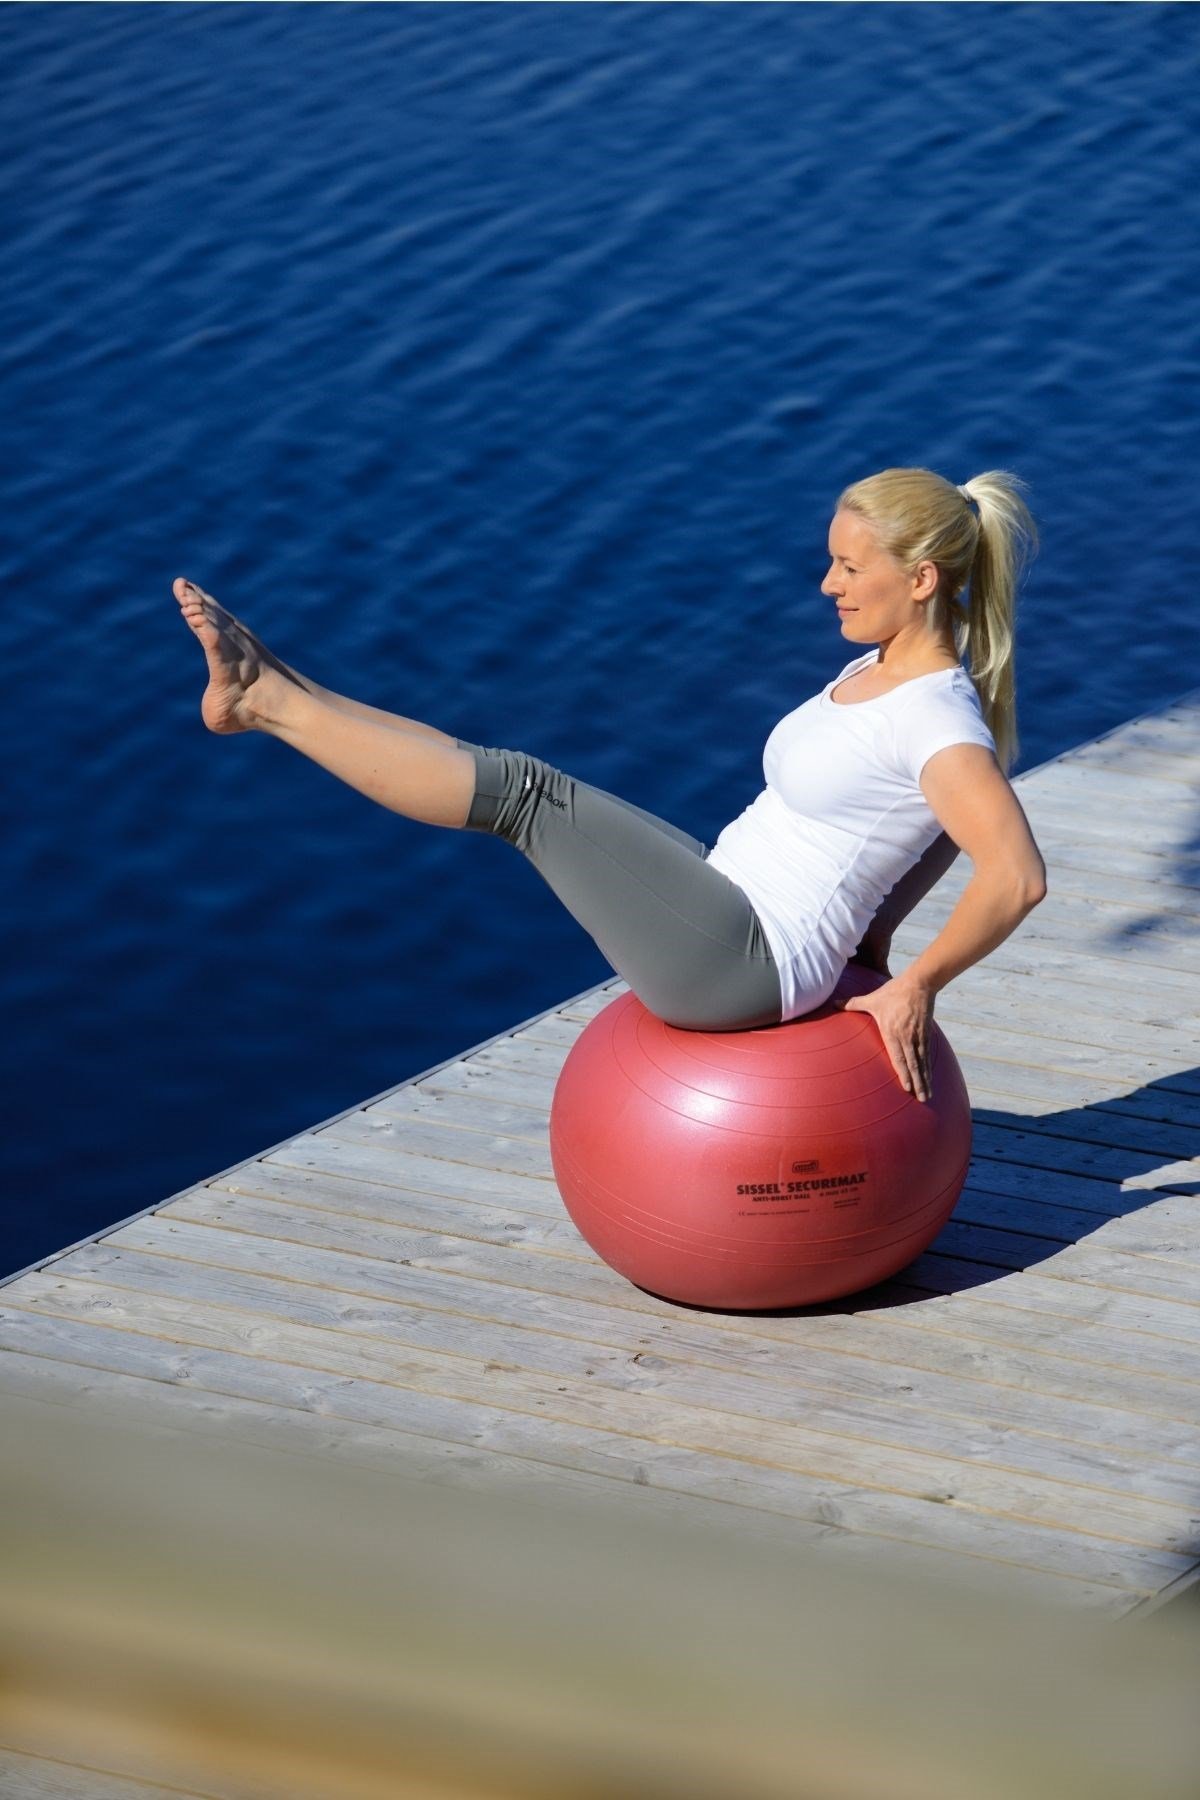 Large Exercise Ball - Sissel SecureMax Pilates Ball